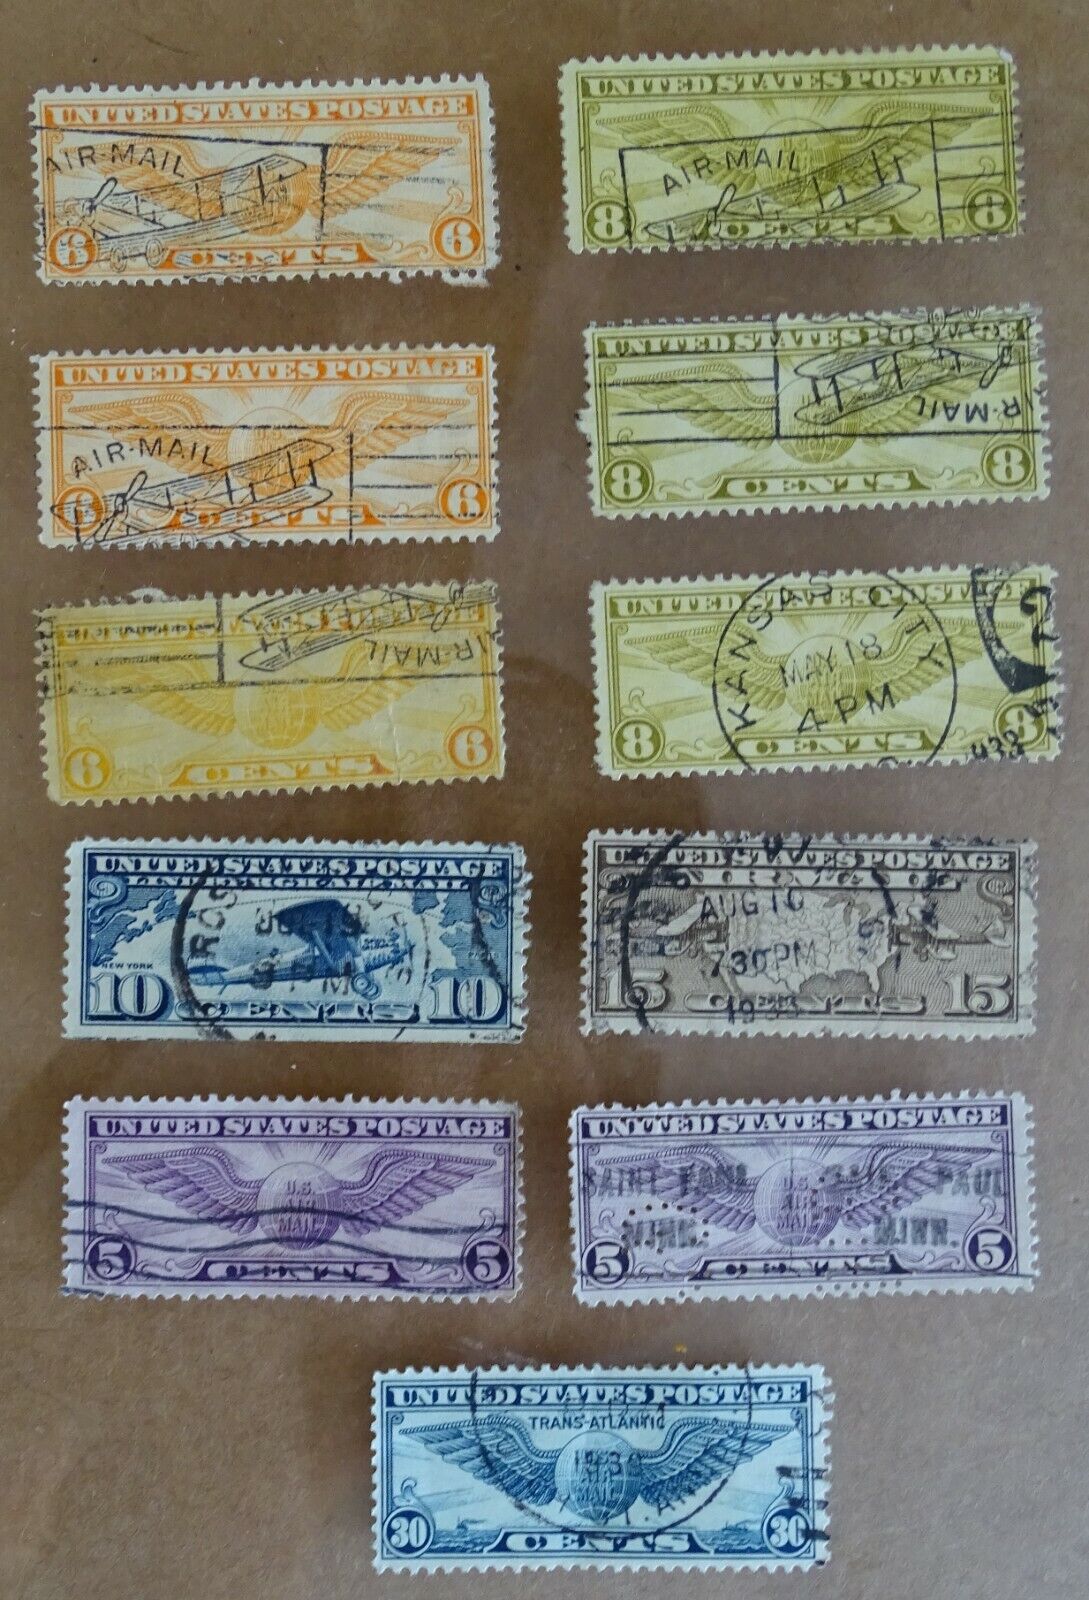 1915 American-Hawaiian Steamship Co Sticker + Various early USA Airmail Stamps